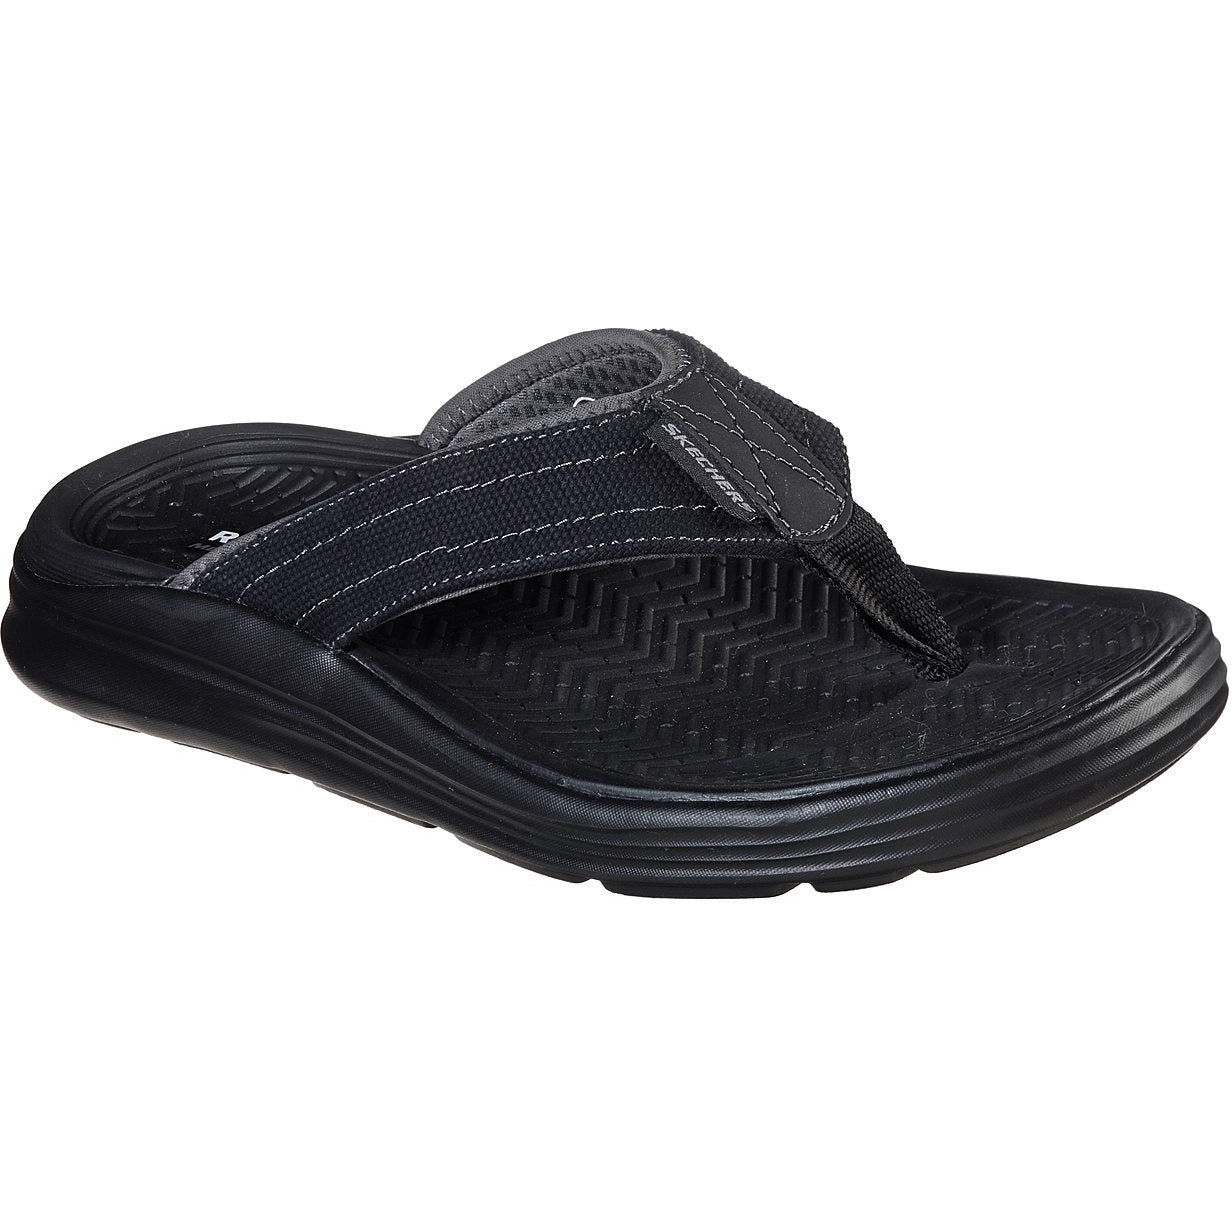 SANDALE SKECHERS SARGO - WOLTERS HOMME